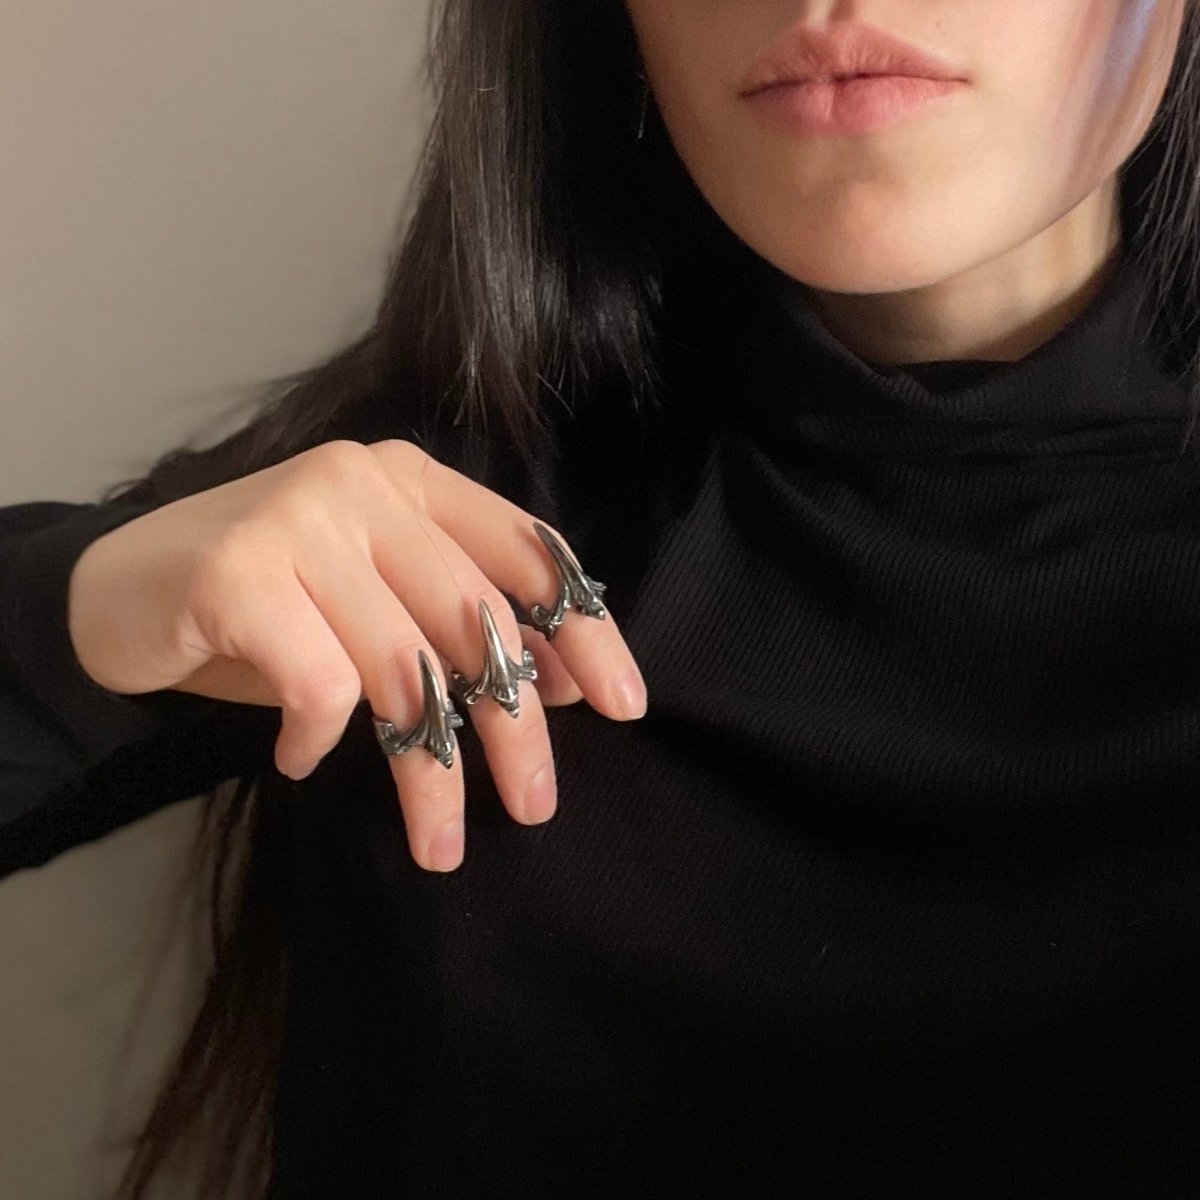 CLAW PHALANX RING - Macabre Gadgets Store